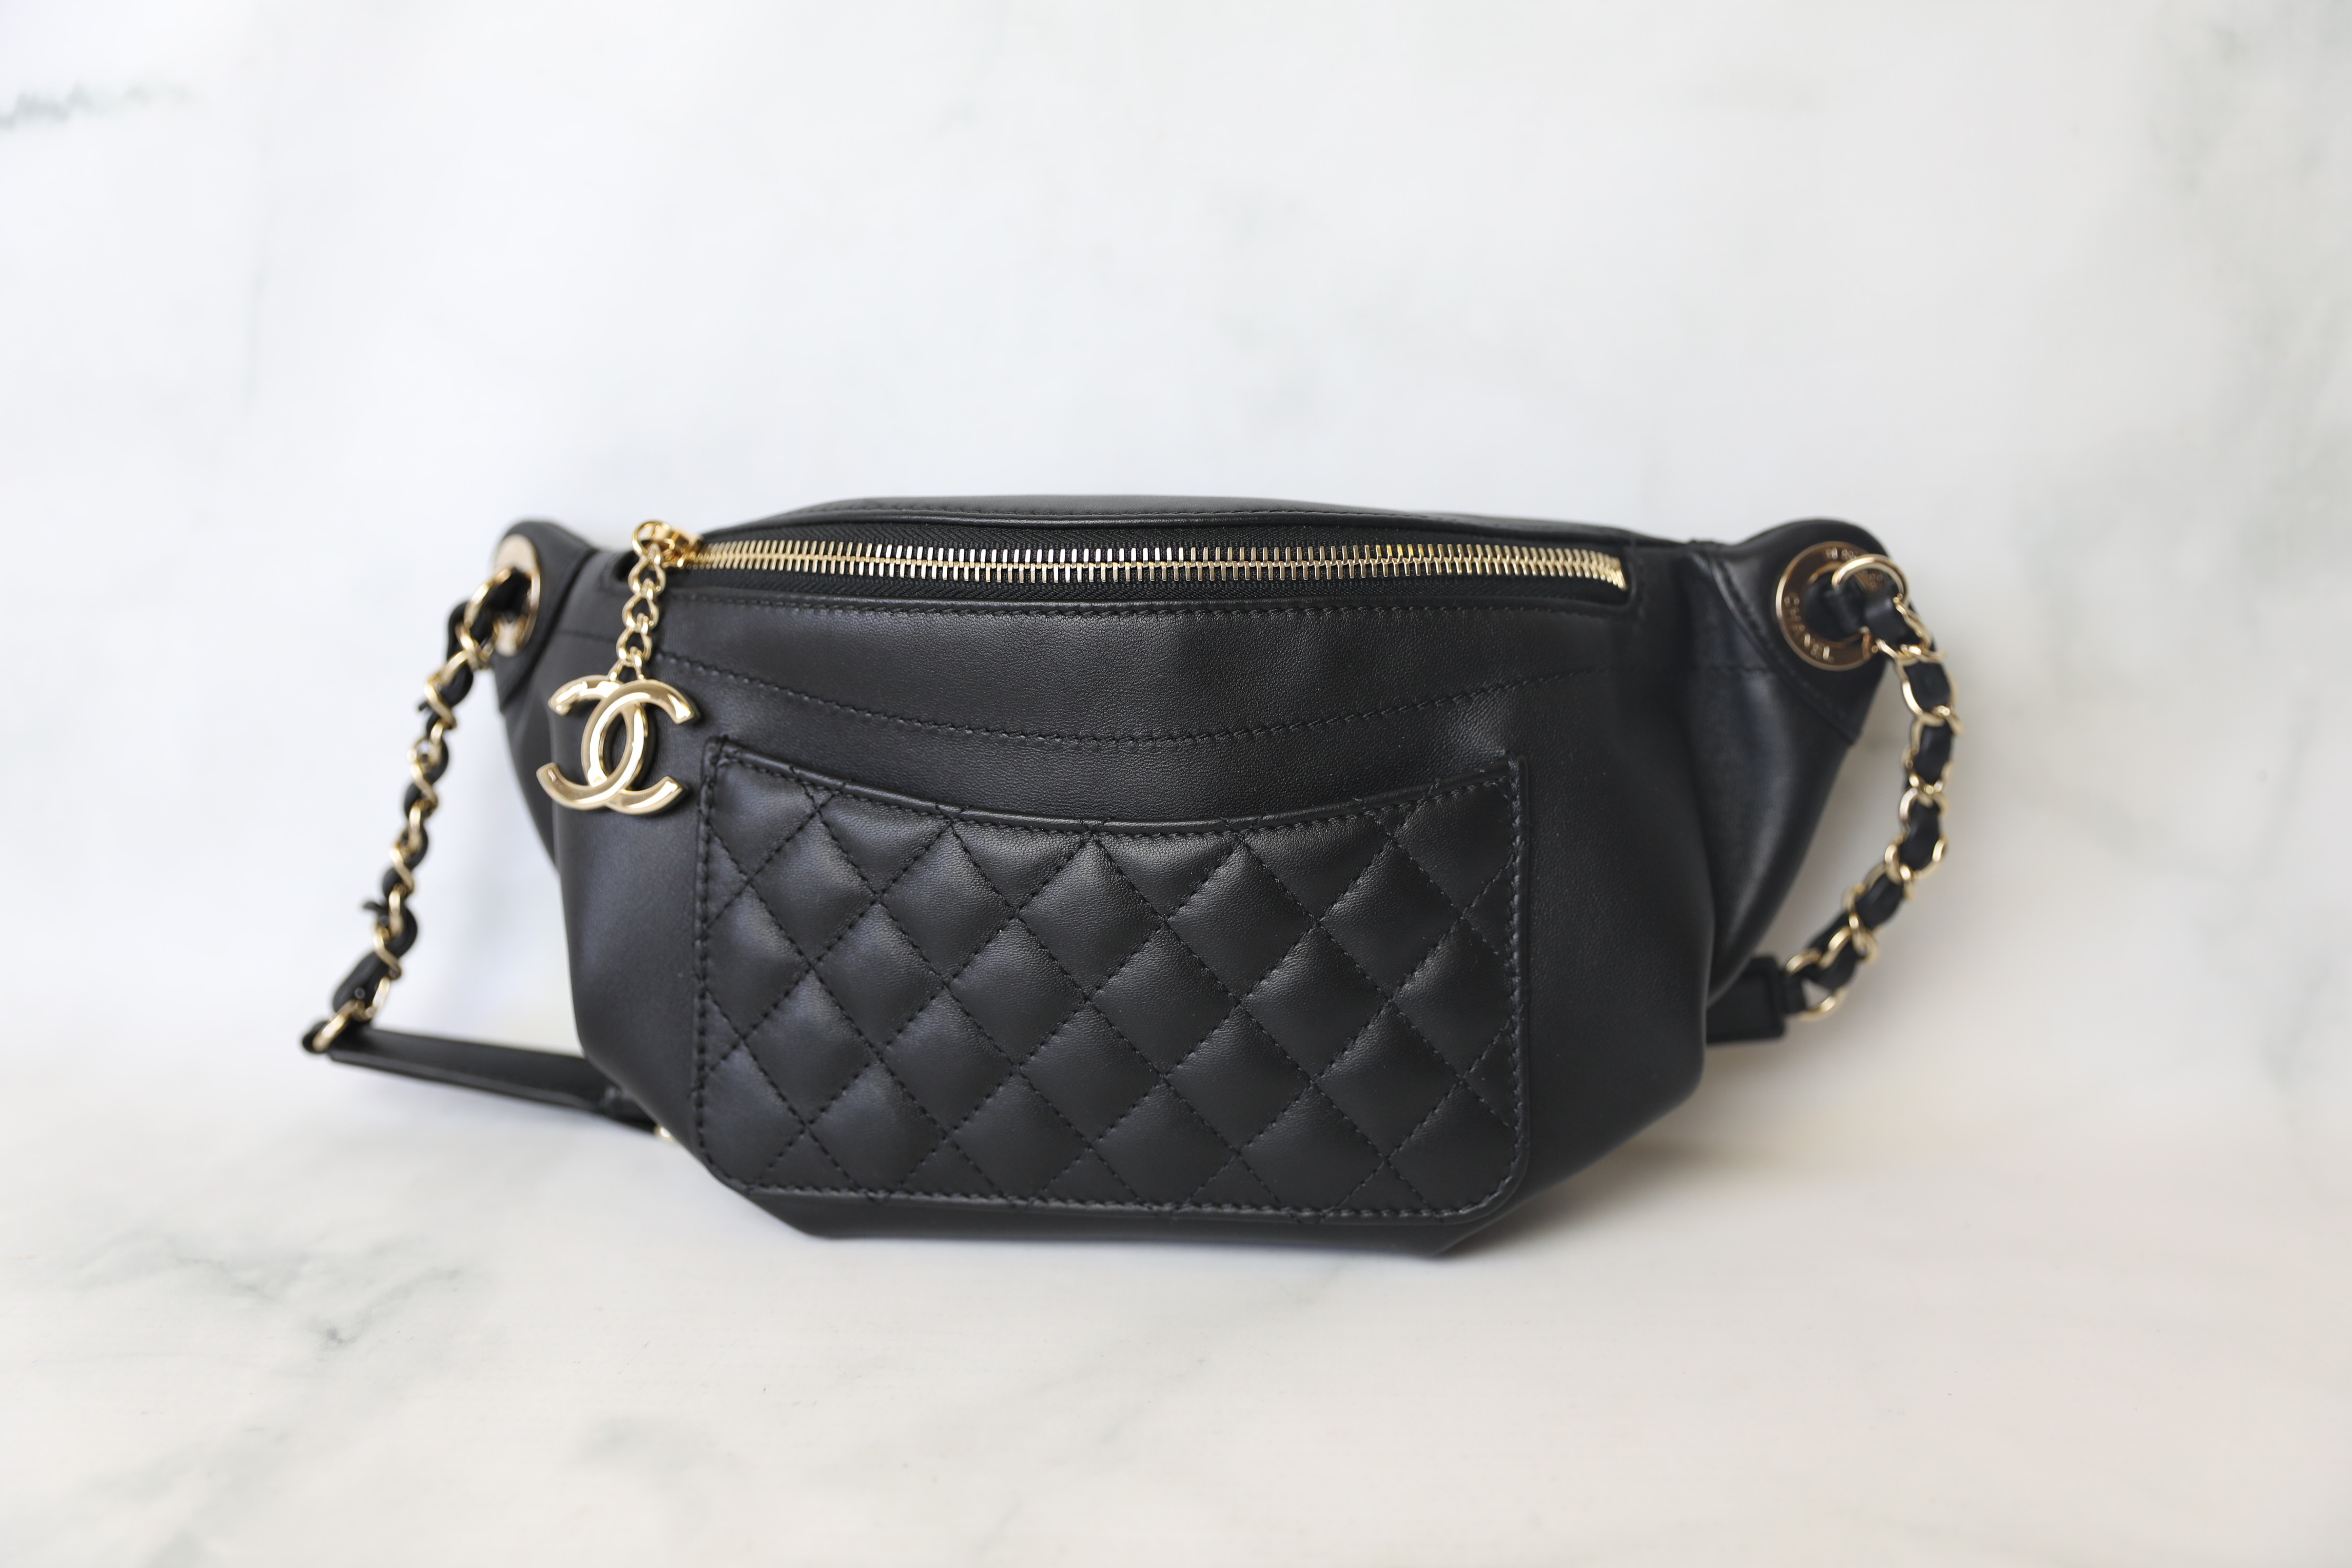 Chanel Affinity Waist Belt Bum Bag, Black Calfskin with Gold Hardware,  Preowned in Dustbag WA001 - Julia Rose Boston